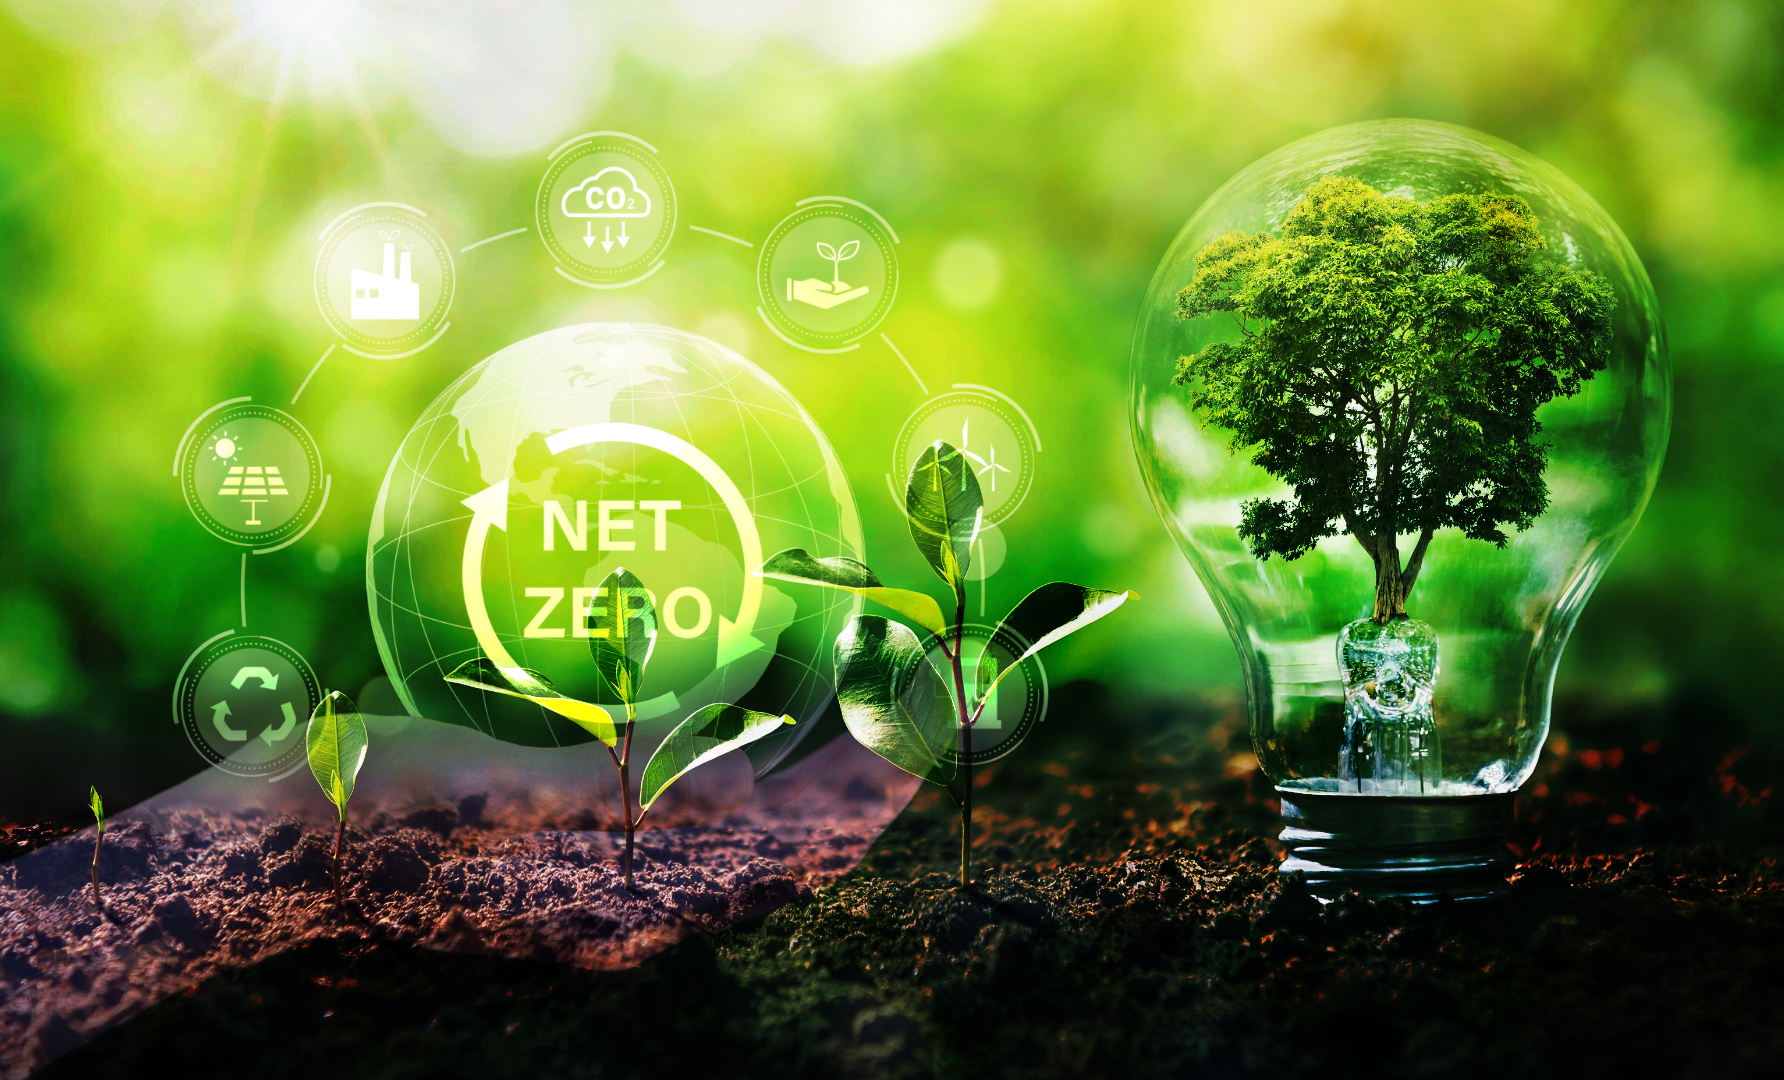 Net zero: Organizations believe that the cloud will be the trigger